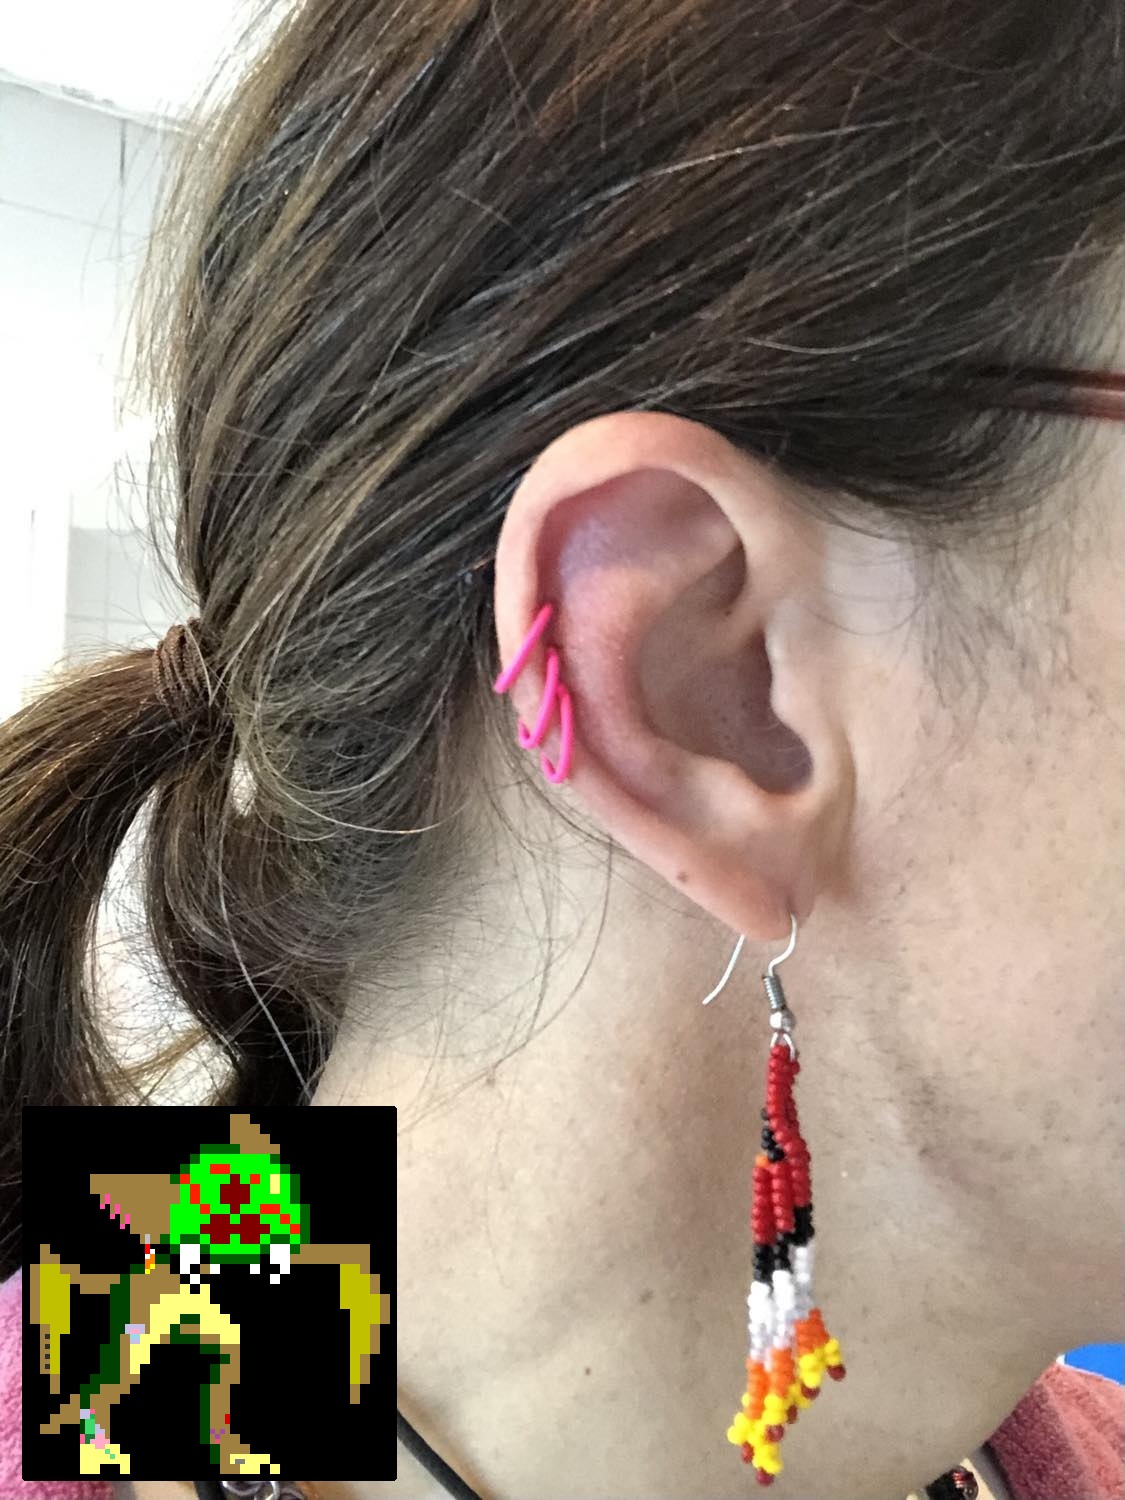 A photo of Kabutroid's right ear showing the three pink hoop rings in her helix piercings, while also wearing an indigenous red beaded earring in the lobe. In the bottom left corner, superimposed is Kabutroid's sprite, also showing a sprite version of the three hoops and beaded earring.